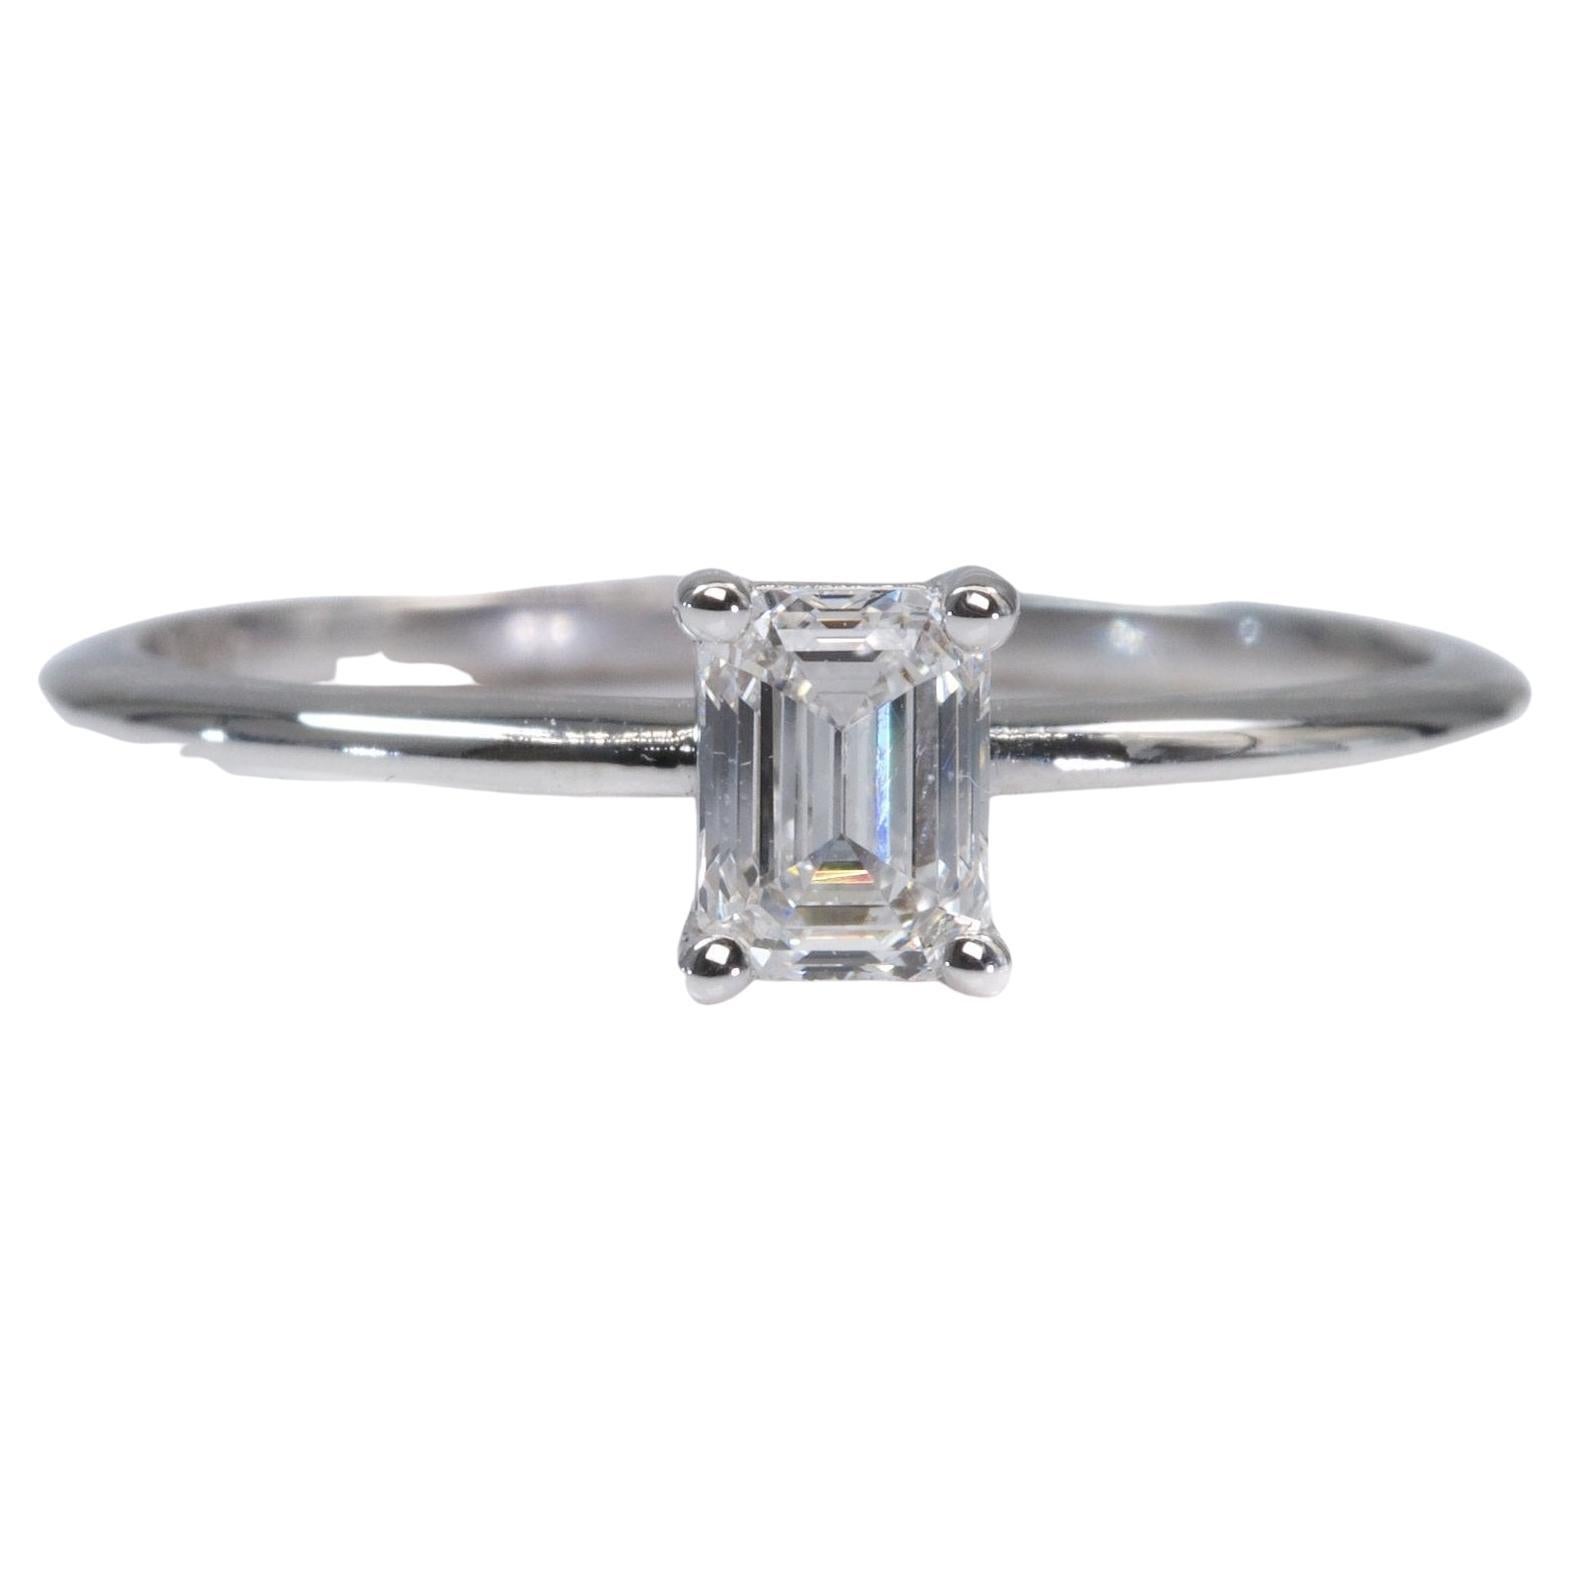 Sparkling 18K White Gold Ring with 0.86 ct Natural Diamonds- IGI Certificate For Sale